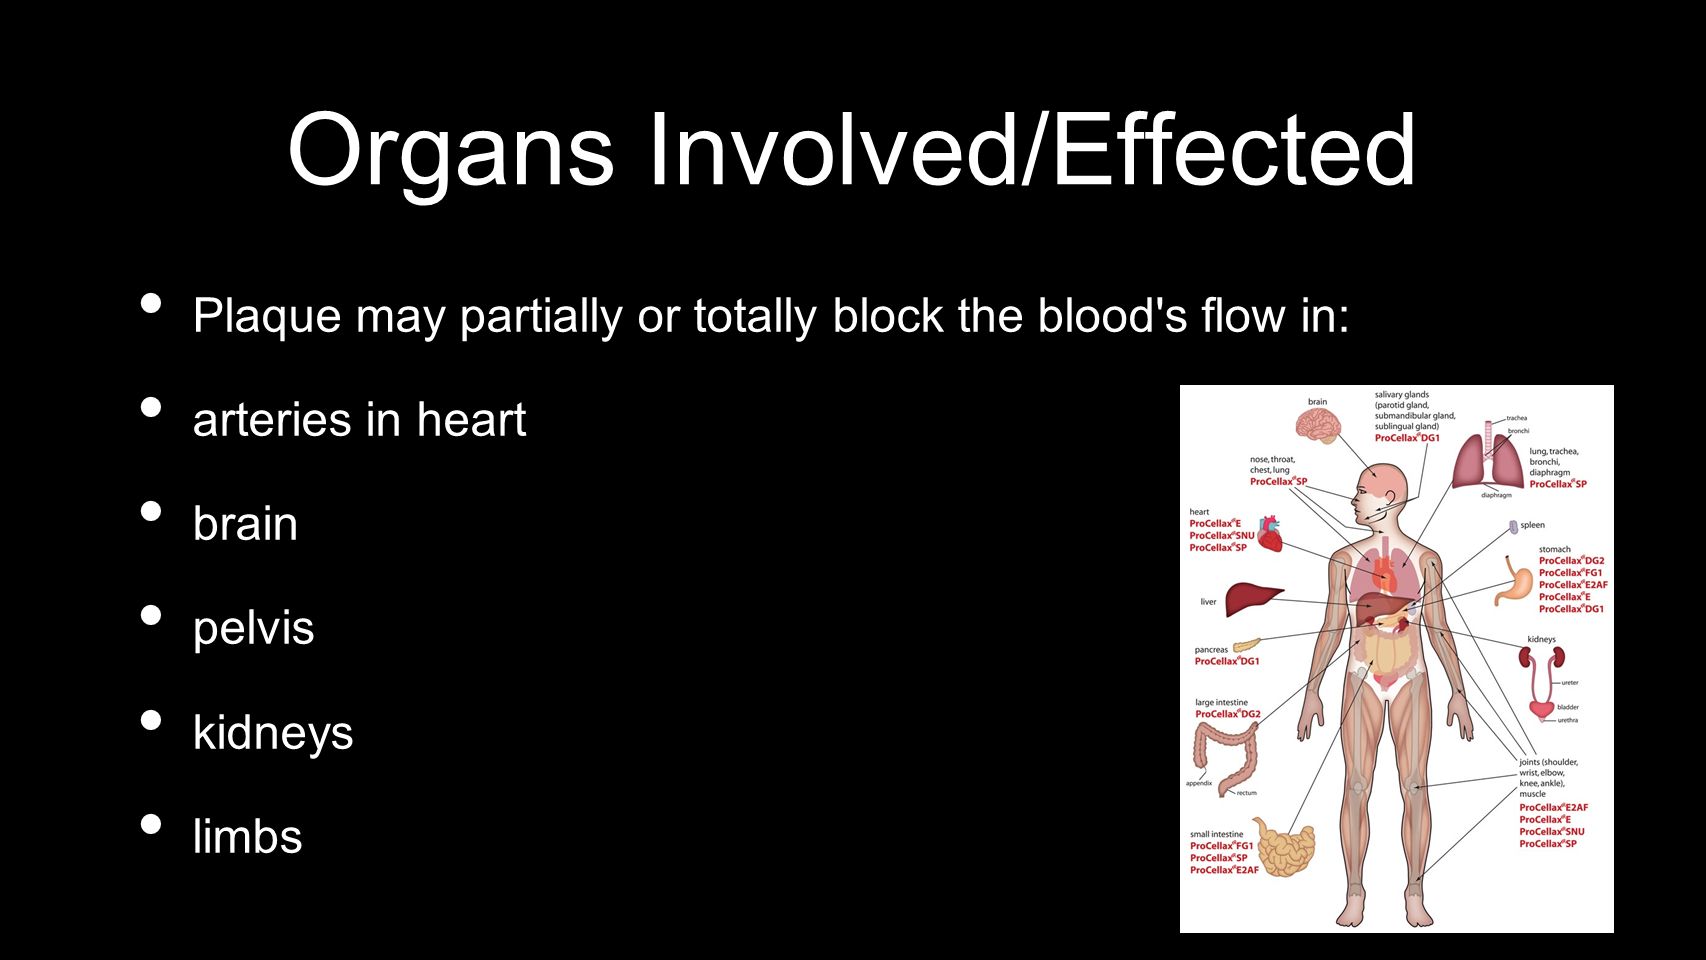 Organs Involved/Effected